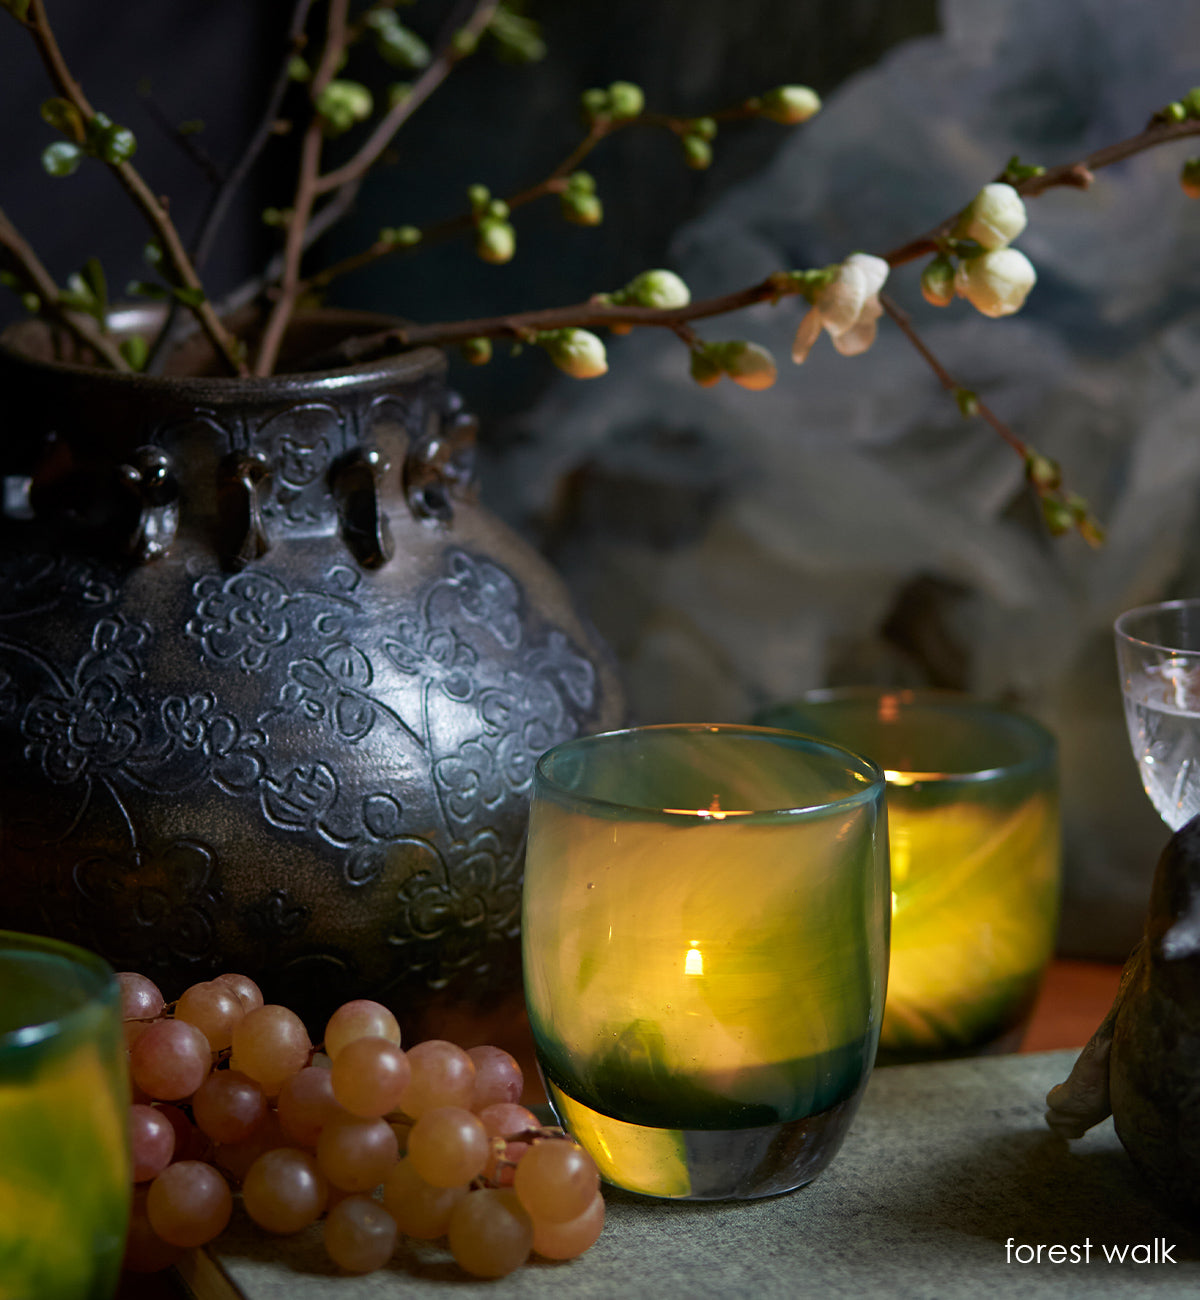 forest walk, translucent green swirl hand-blown glass votive candle holder in a still life setting with grapes and vase.